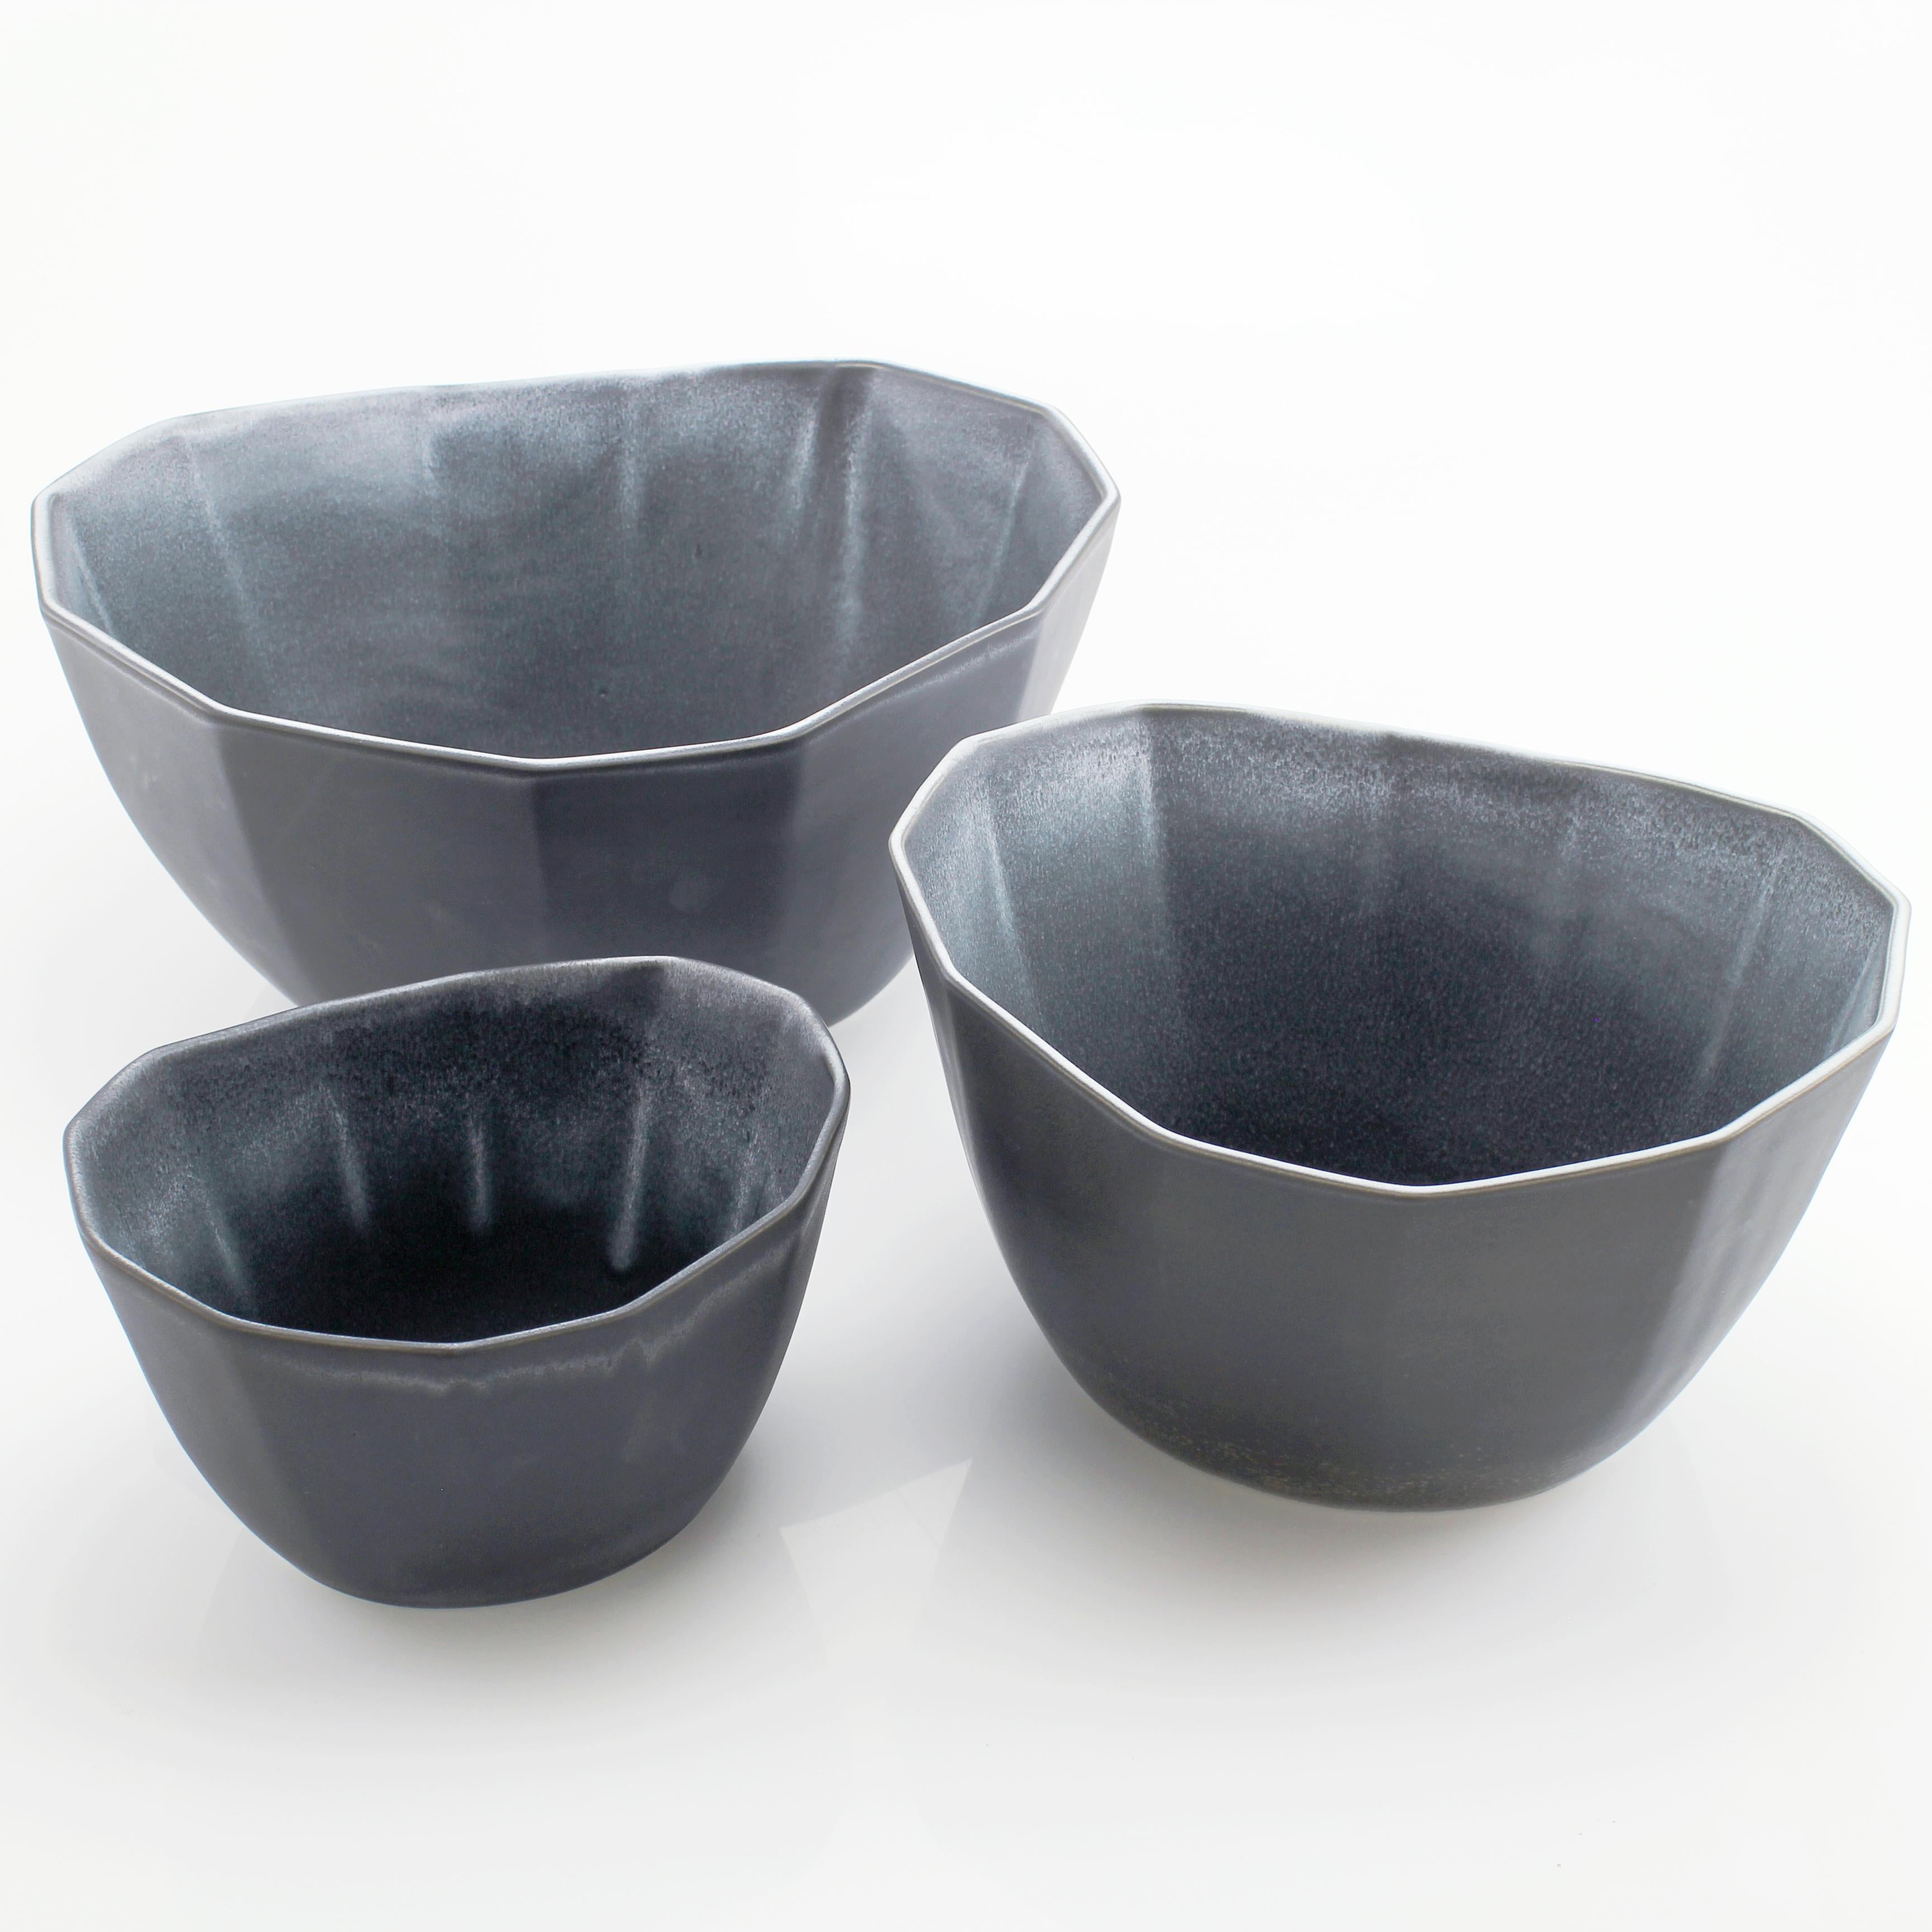 Nesting bowls are a kitchen staple that find purpose in any home. These delightful oval space-savers can serve as an array of serving bowls that you can neatly store in your cabinet, or disperse them around your space to create a unifying and